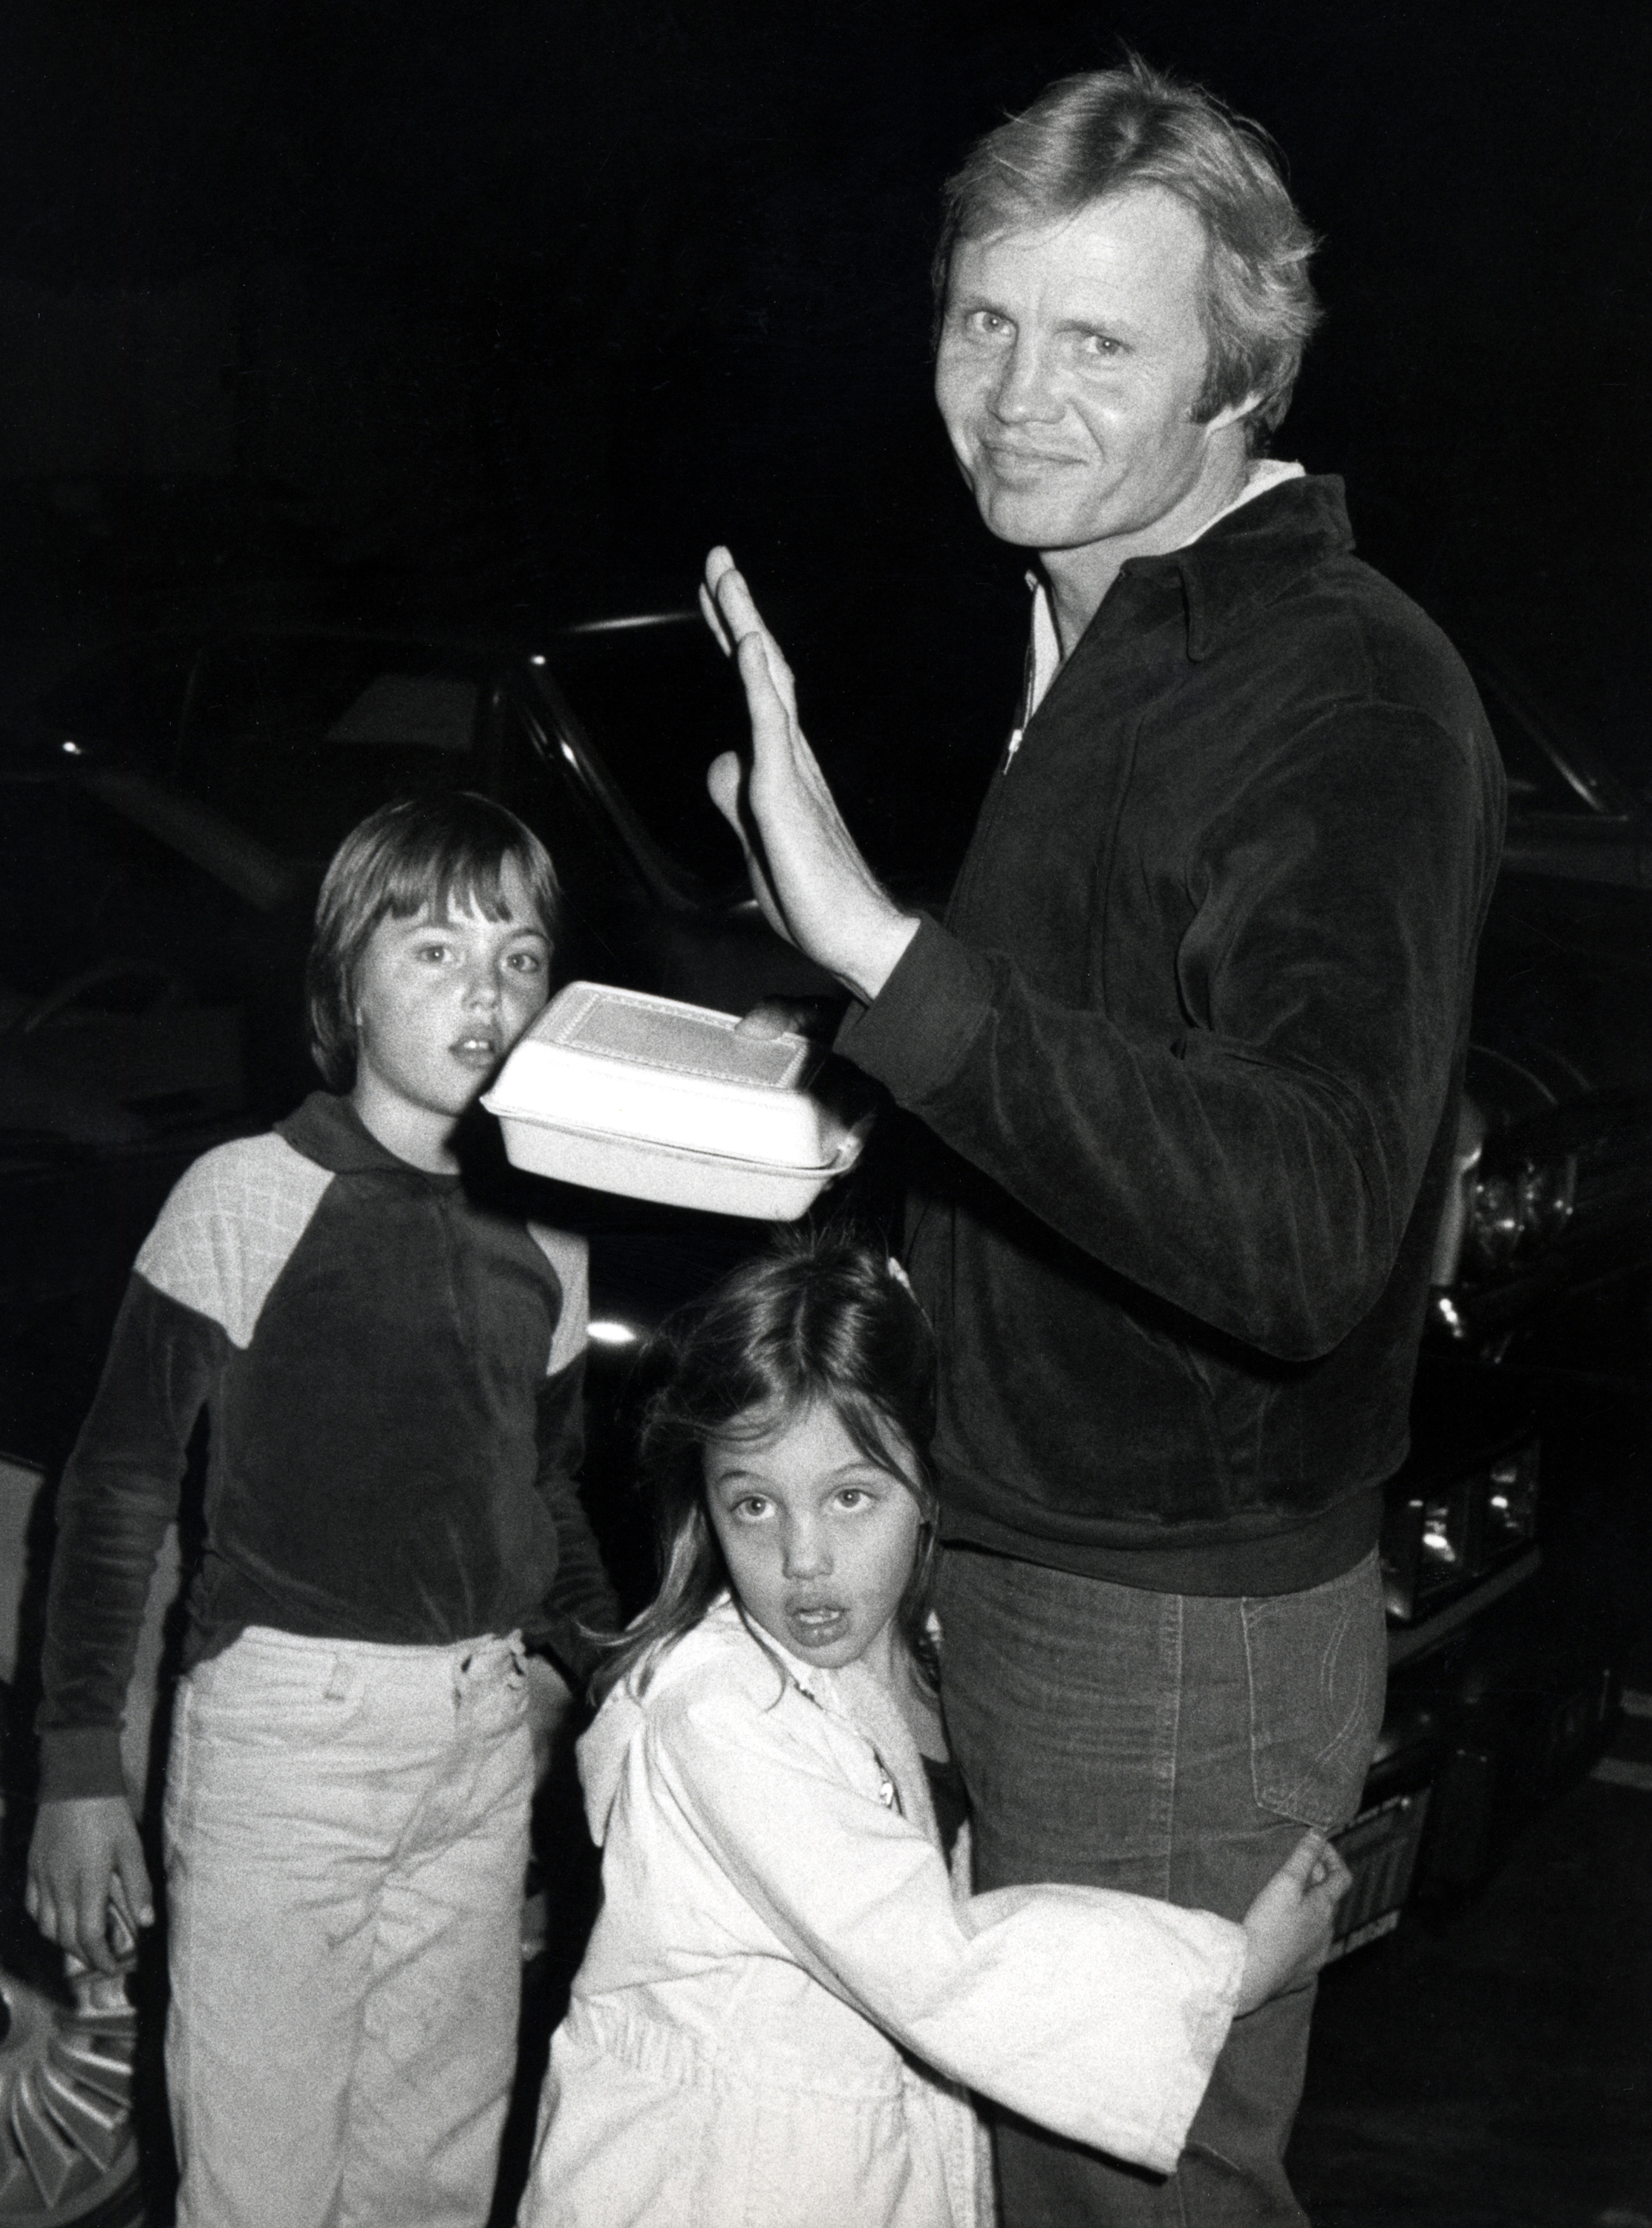 Jaime Haven Voight, Angelina Jolie, and Jon Voight file photo, dated January 1, 1980 | Source: Getty Images